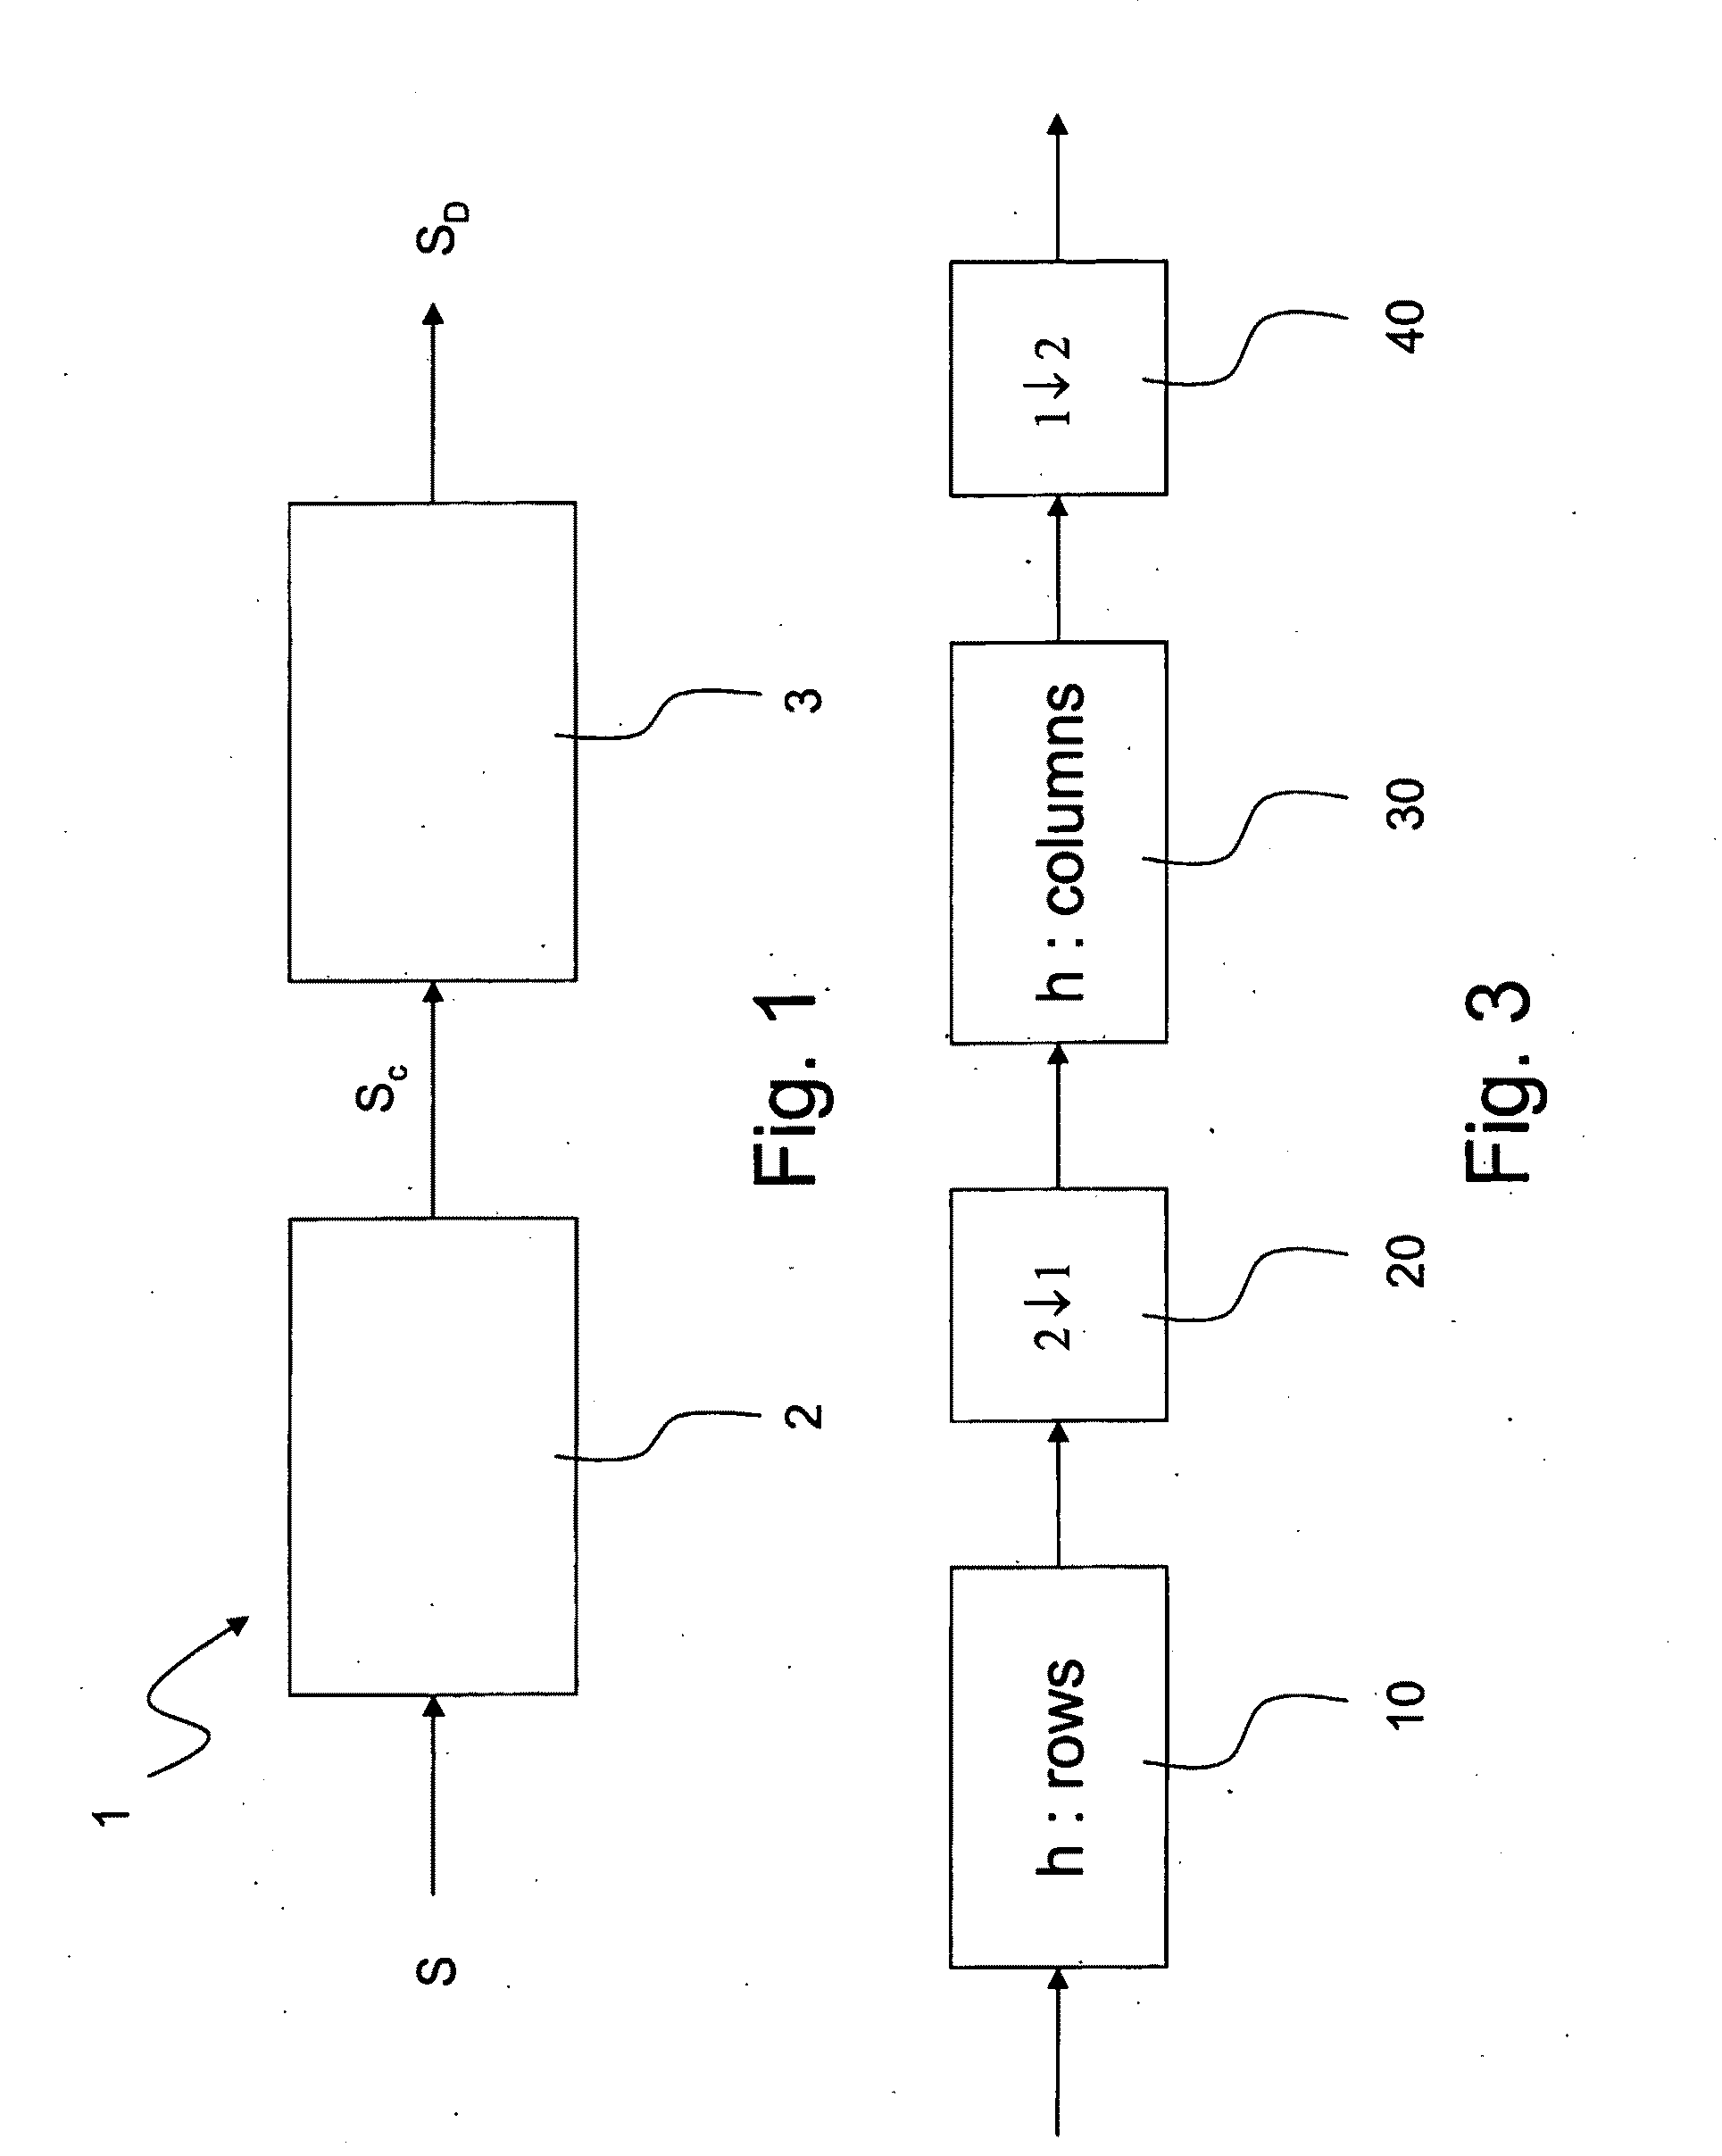 Method for Scalable Video Coding